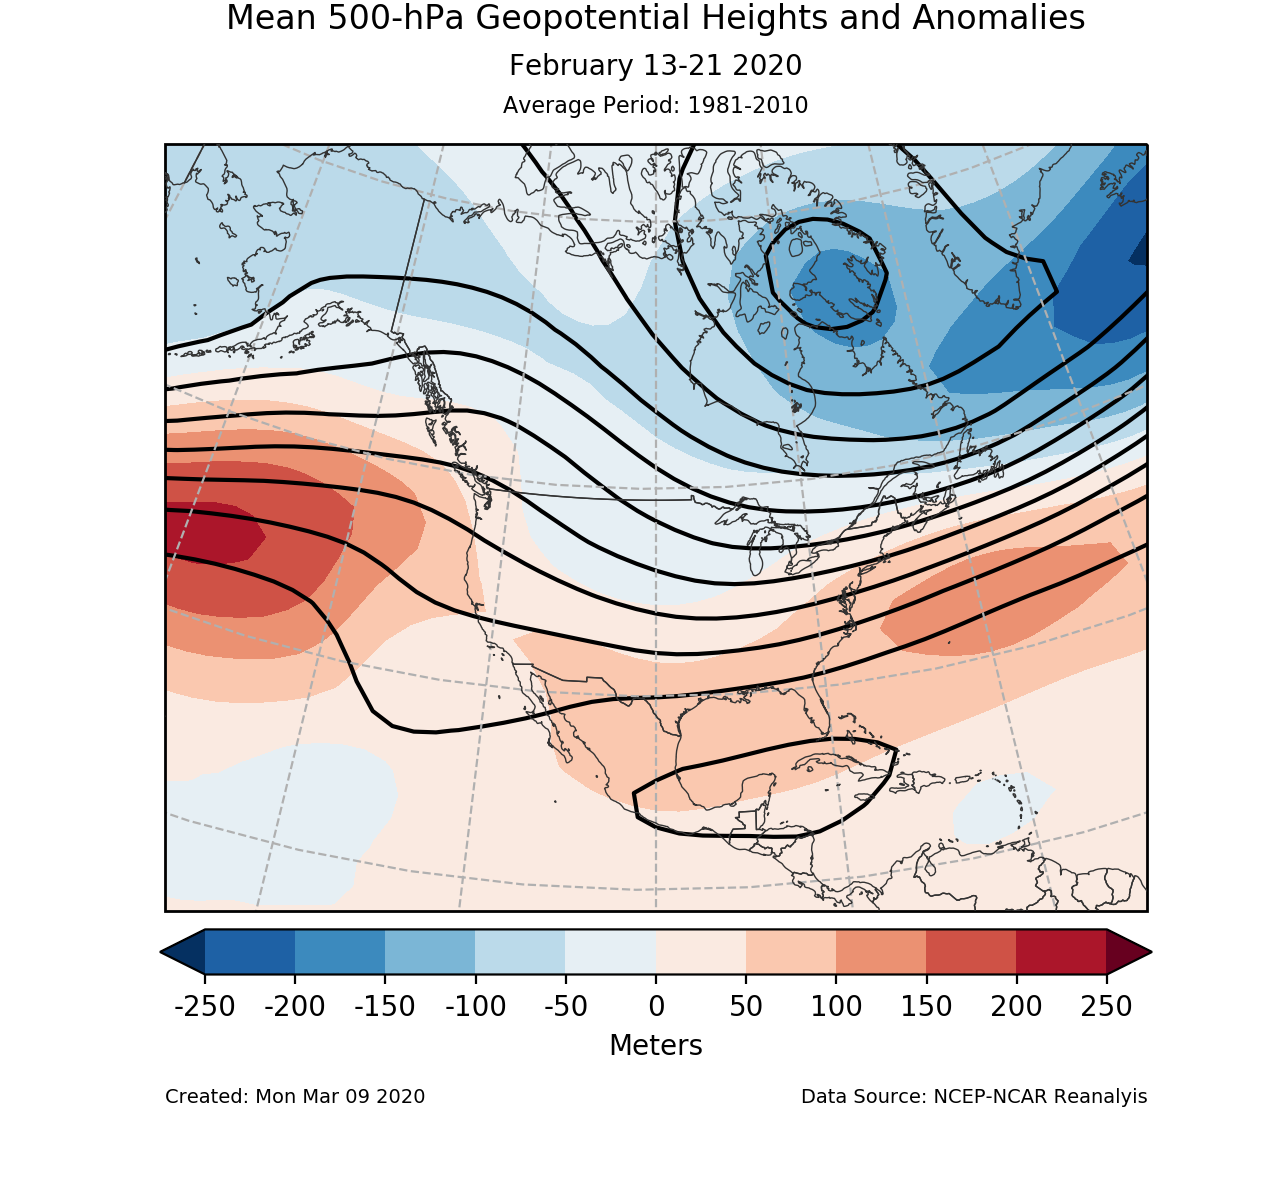 500-mb circulation anomalies for North America for February 13-21 2020